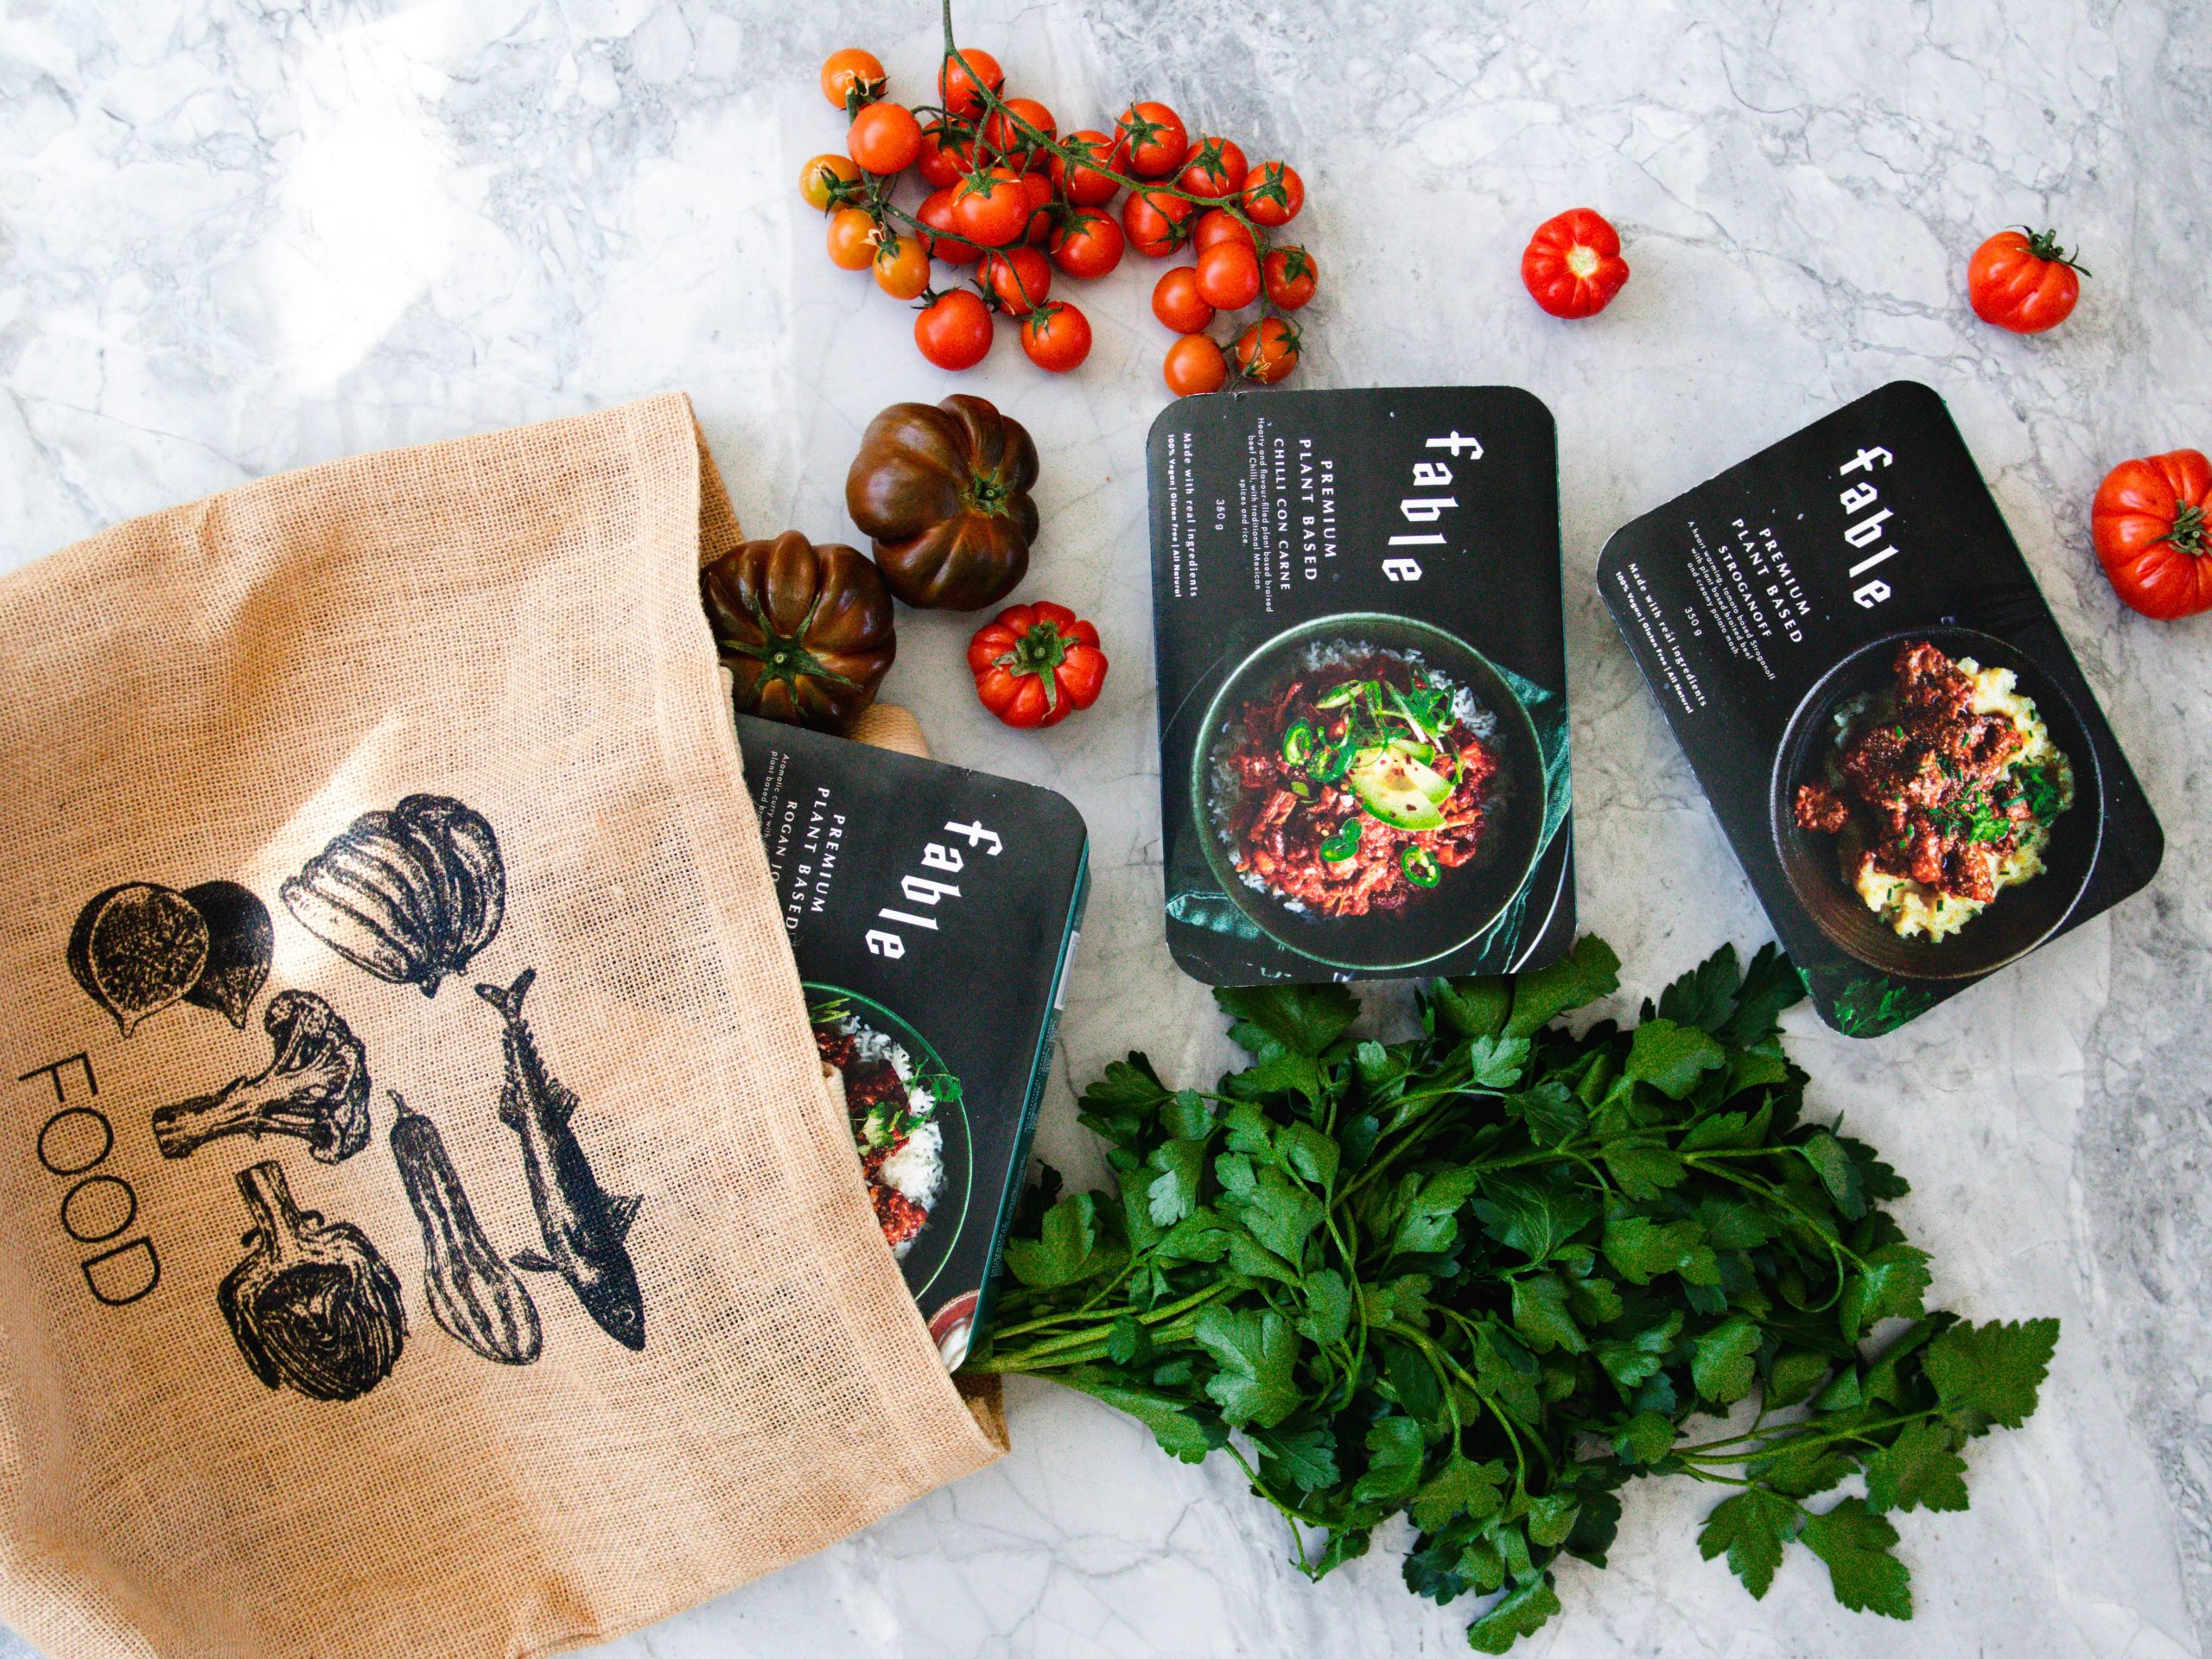 Queensland-based Fable Food Co, a CRC participant, has raised $6.5m in seed funding to ramp up R&D and production of its fungi-based meat-substitute products.